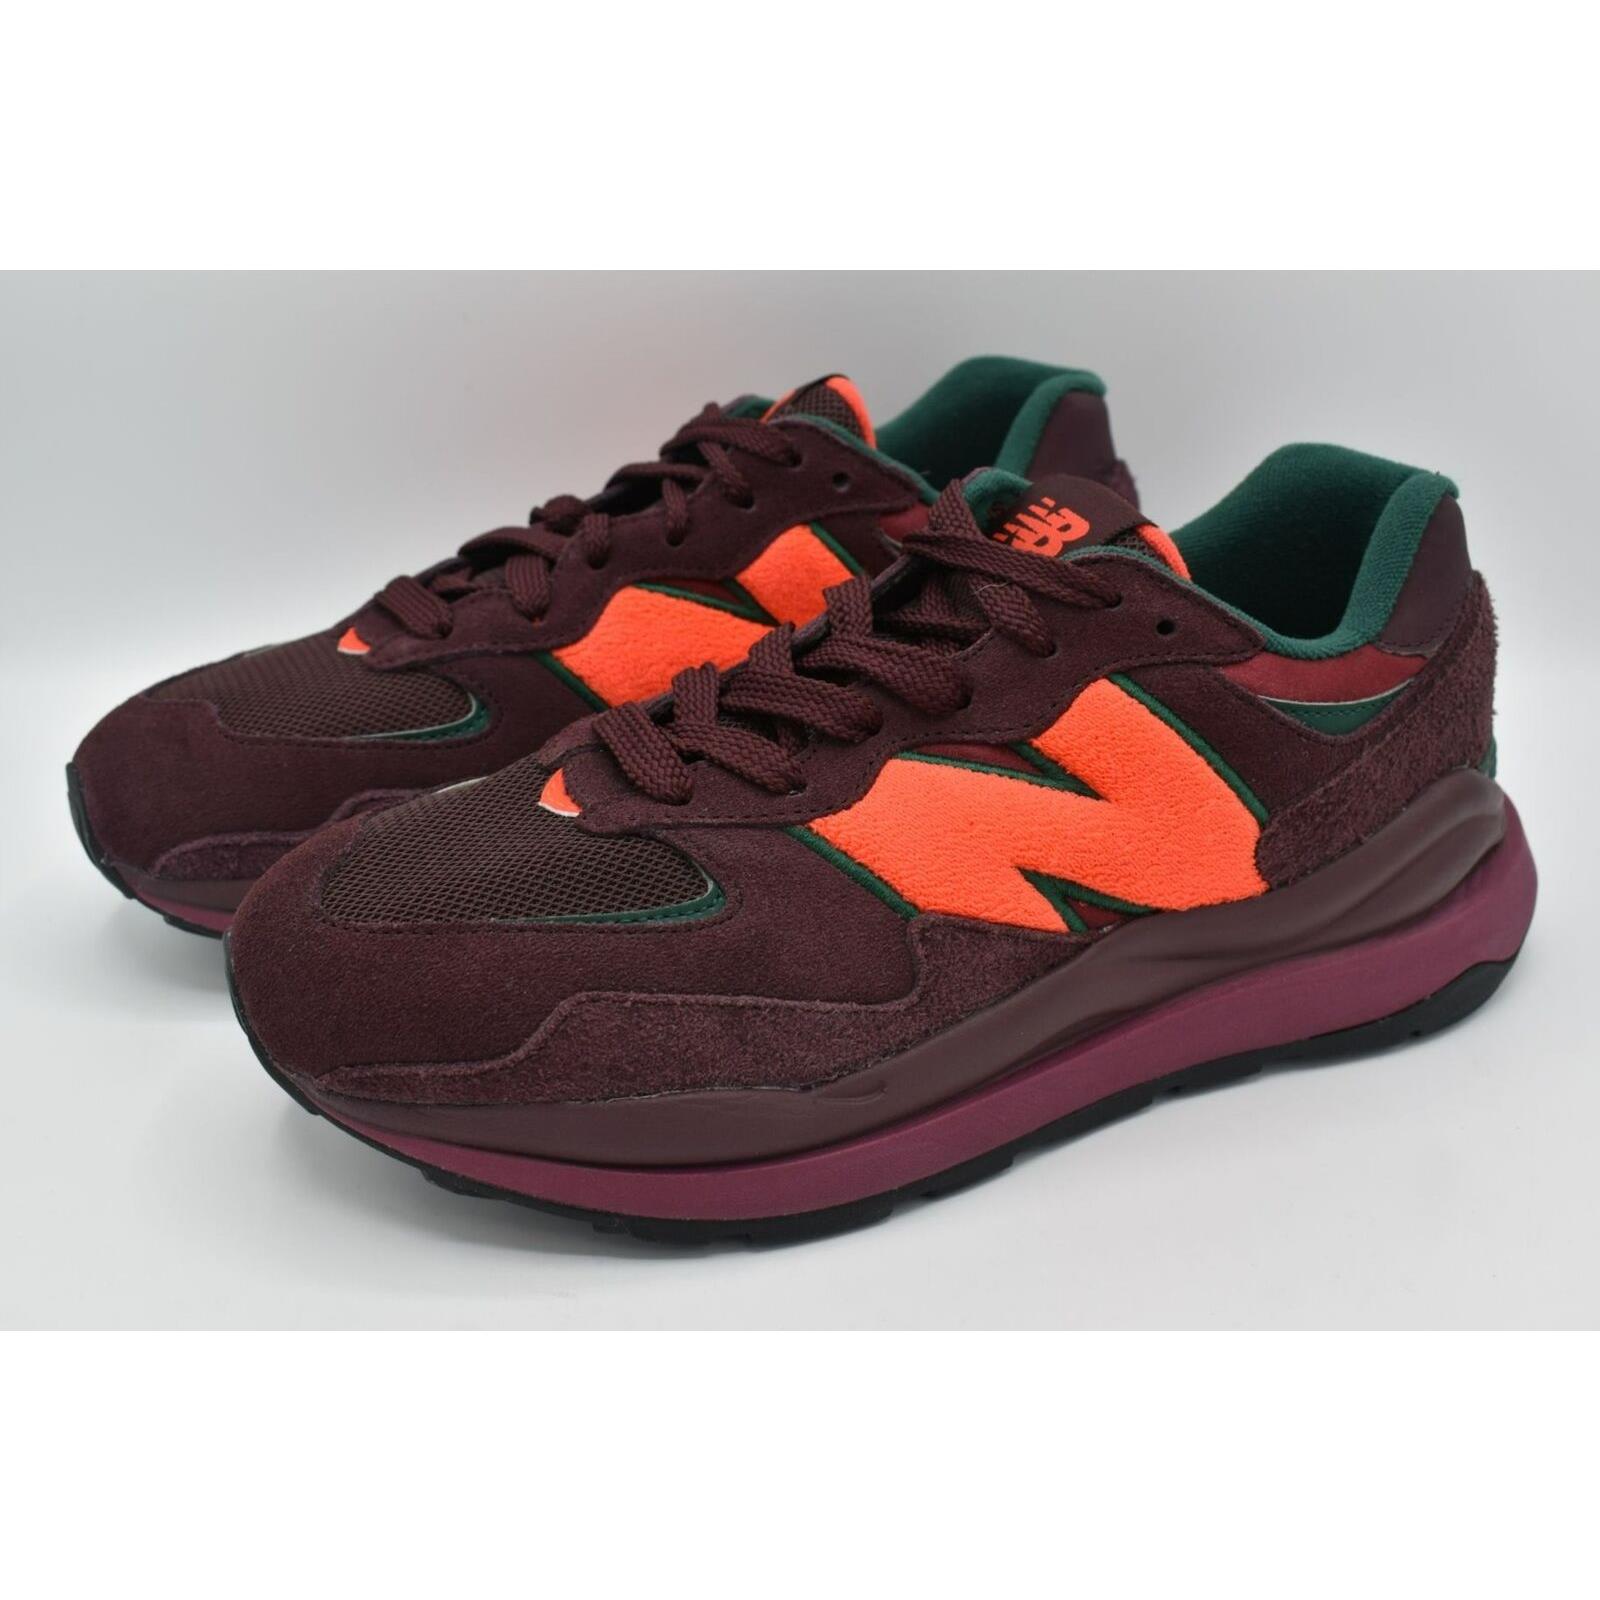 Balance 5740 Mens Size 10.5 Suede Henna Neo Flame Running Shoes Sneakers